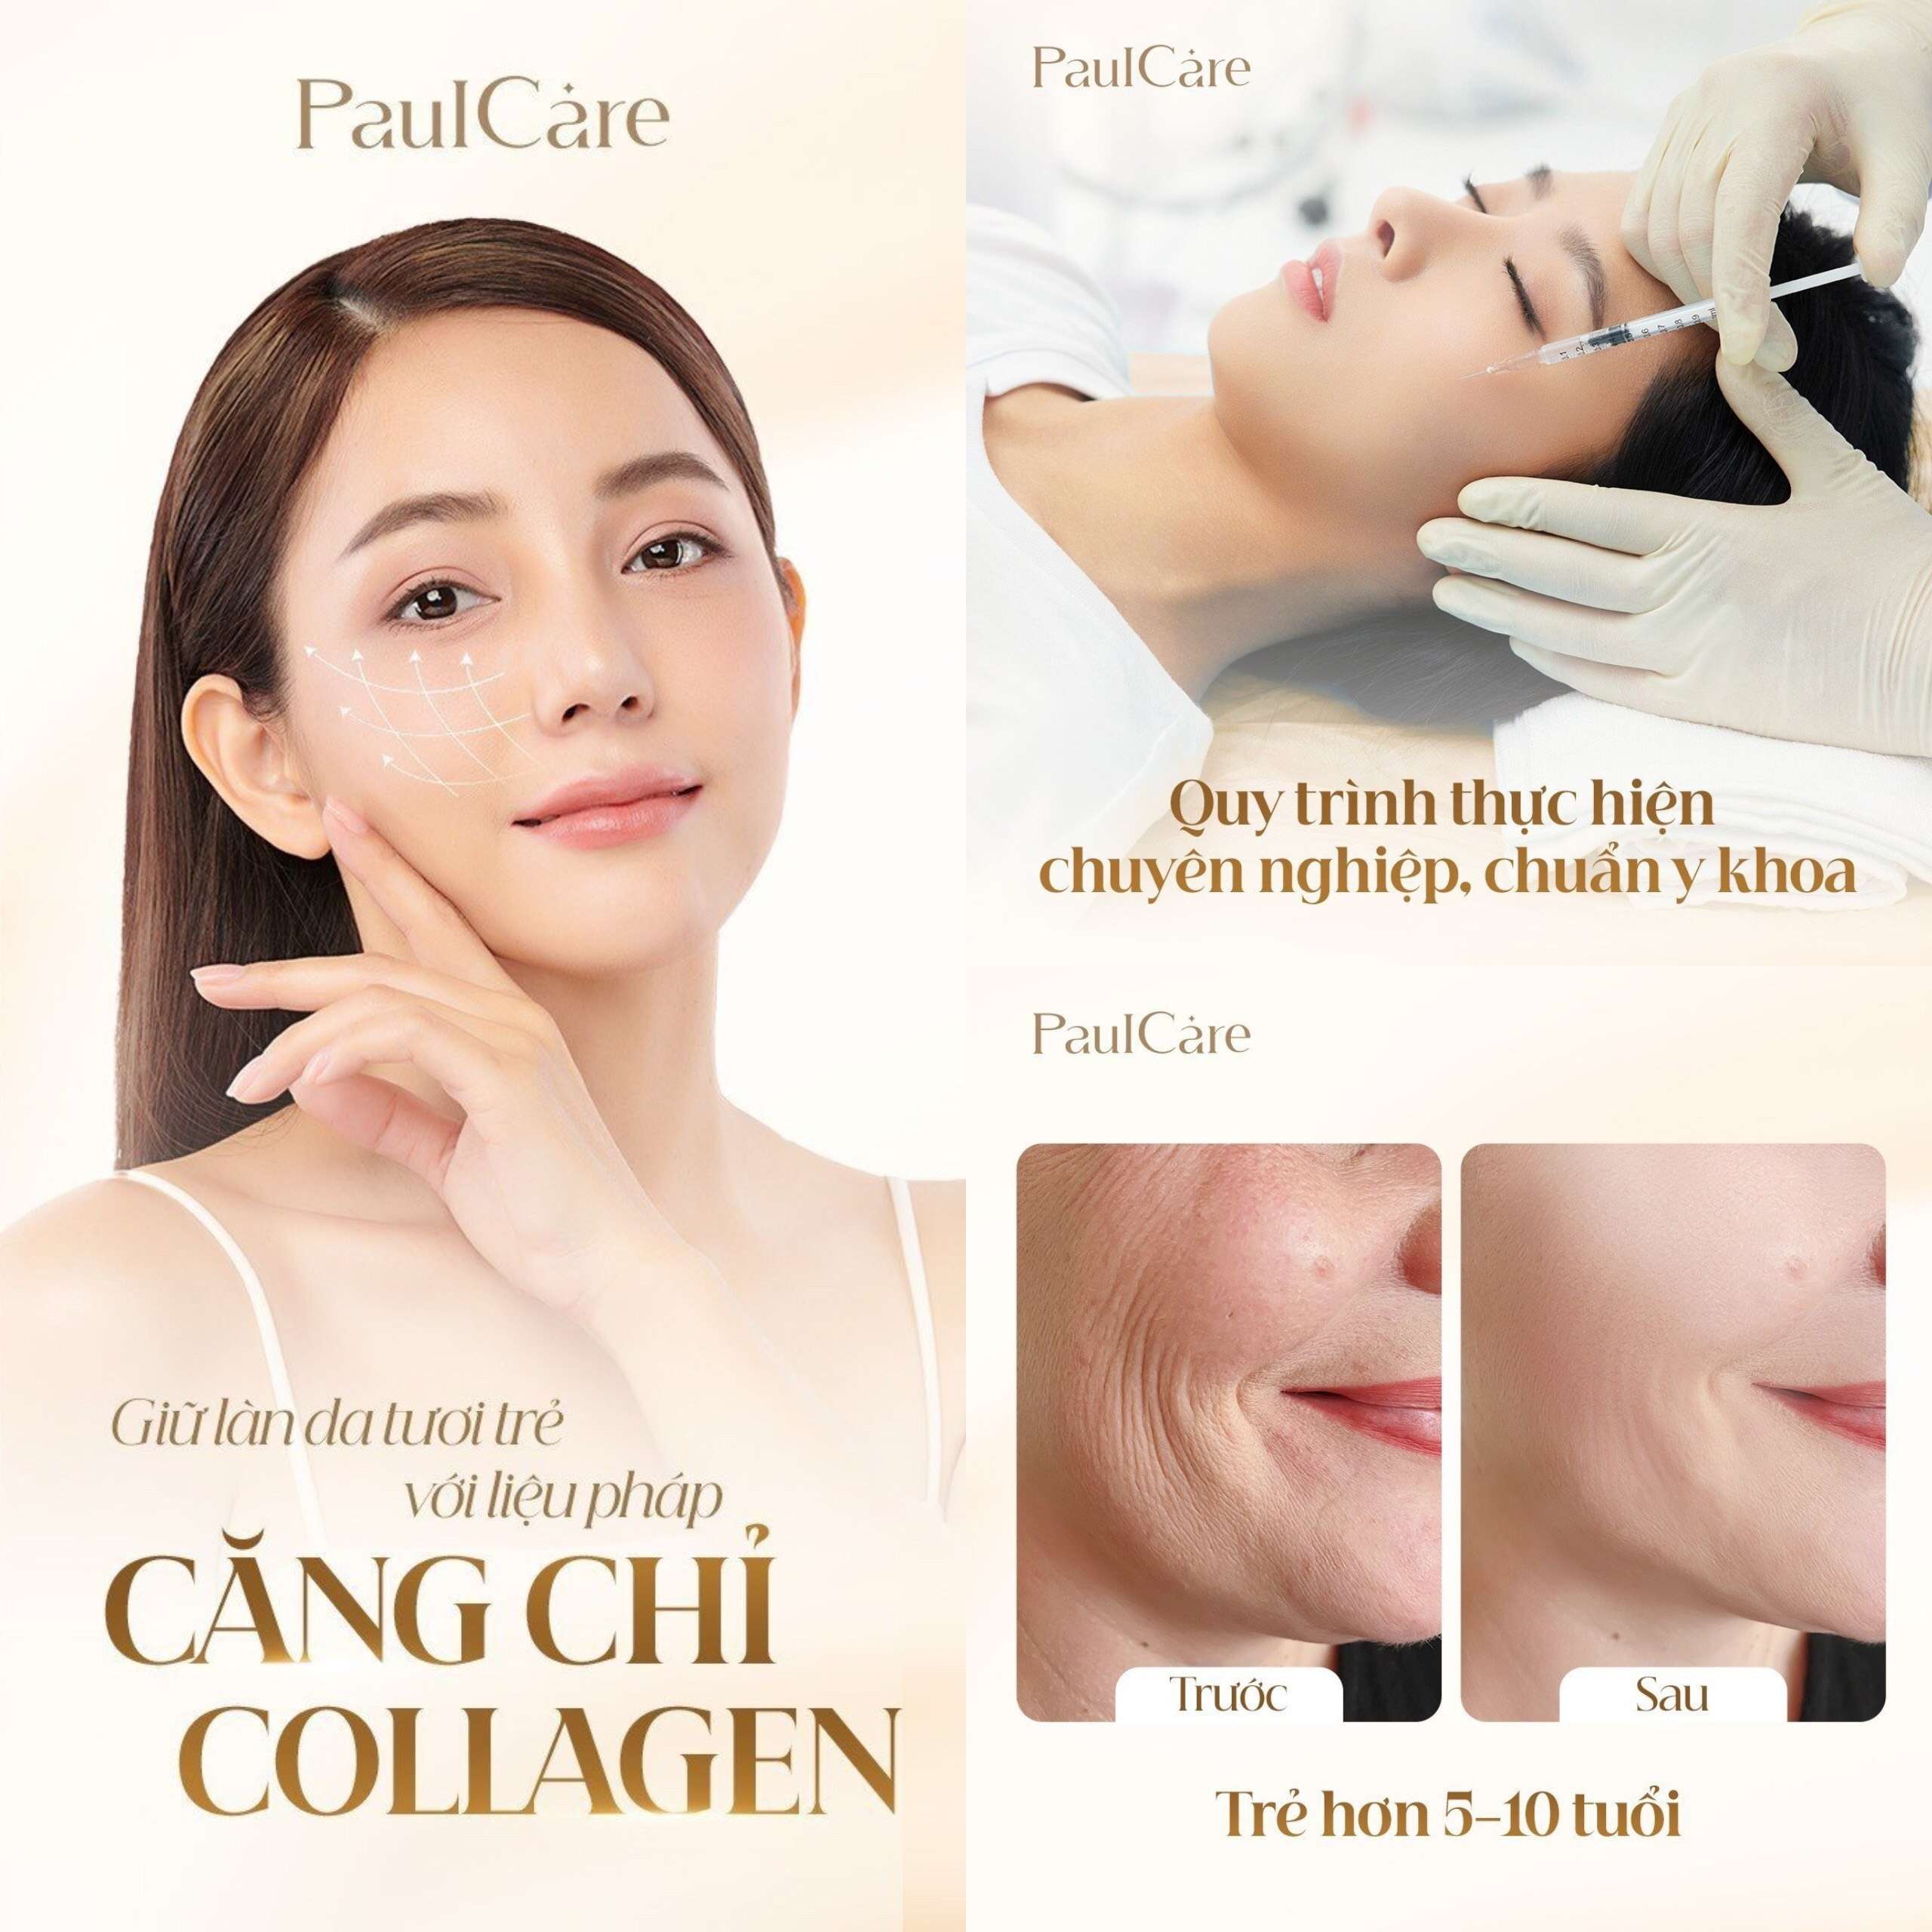 cang_chi_collagen_paulcare